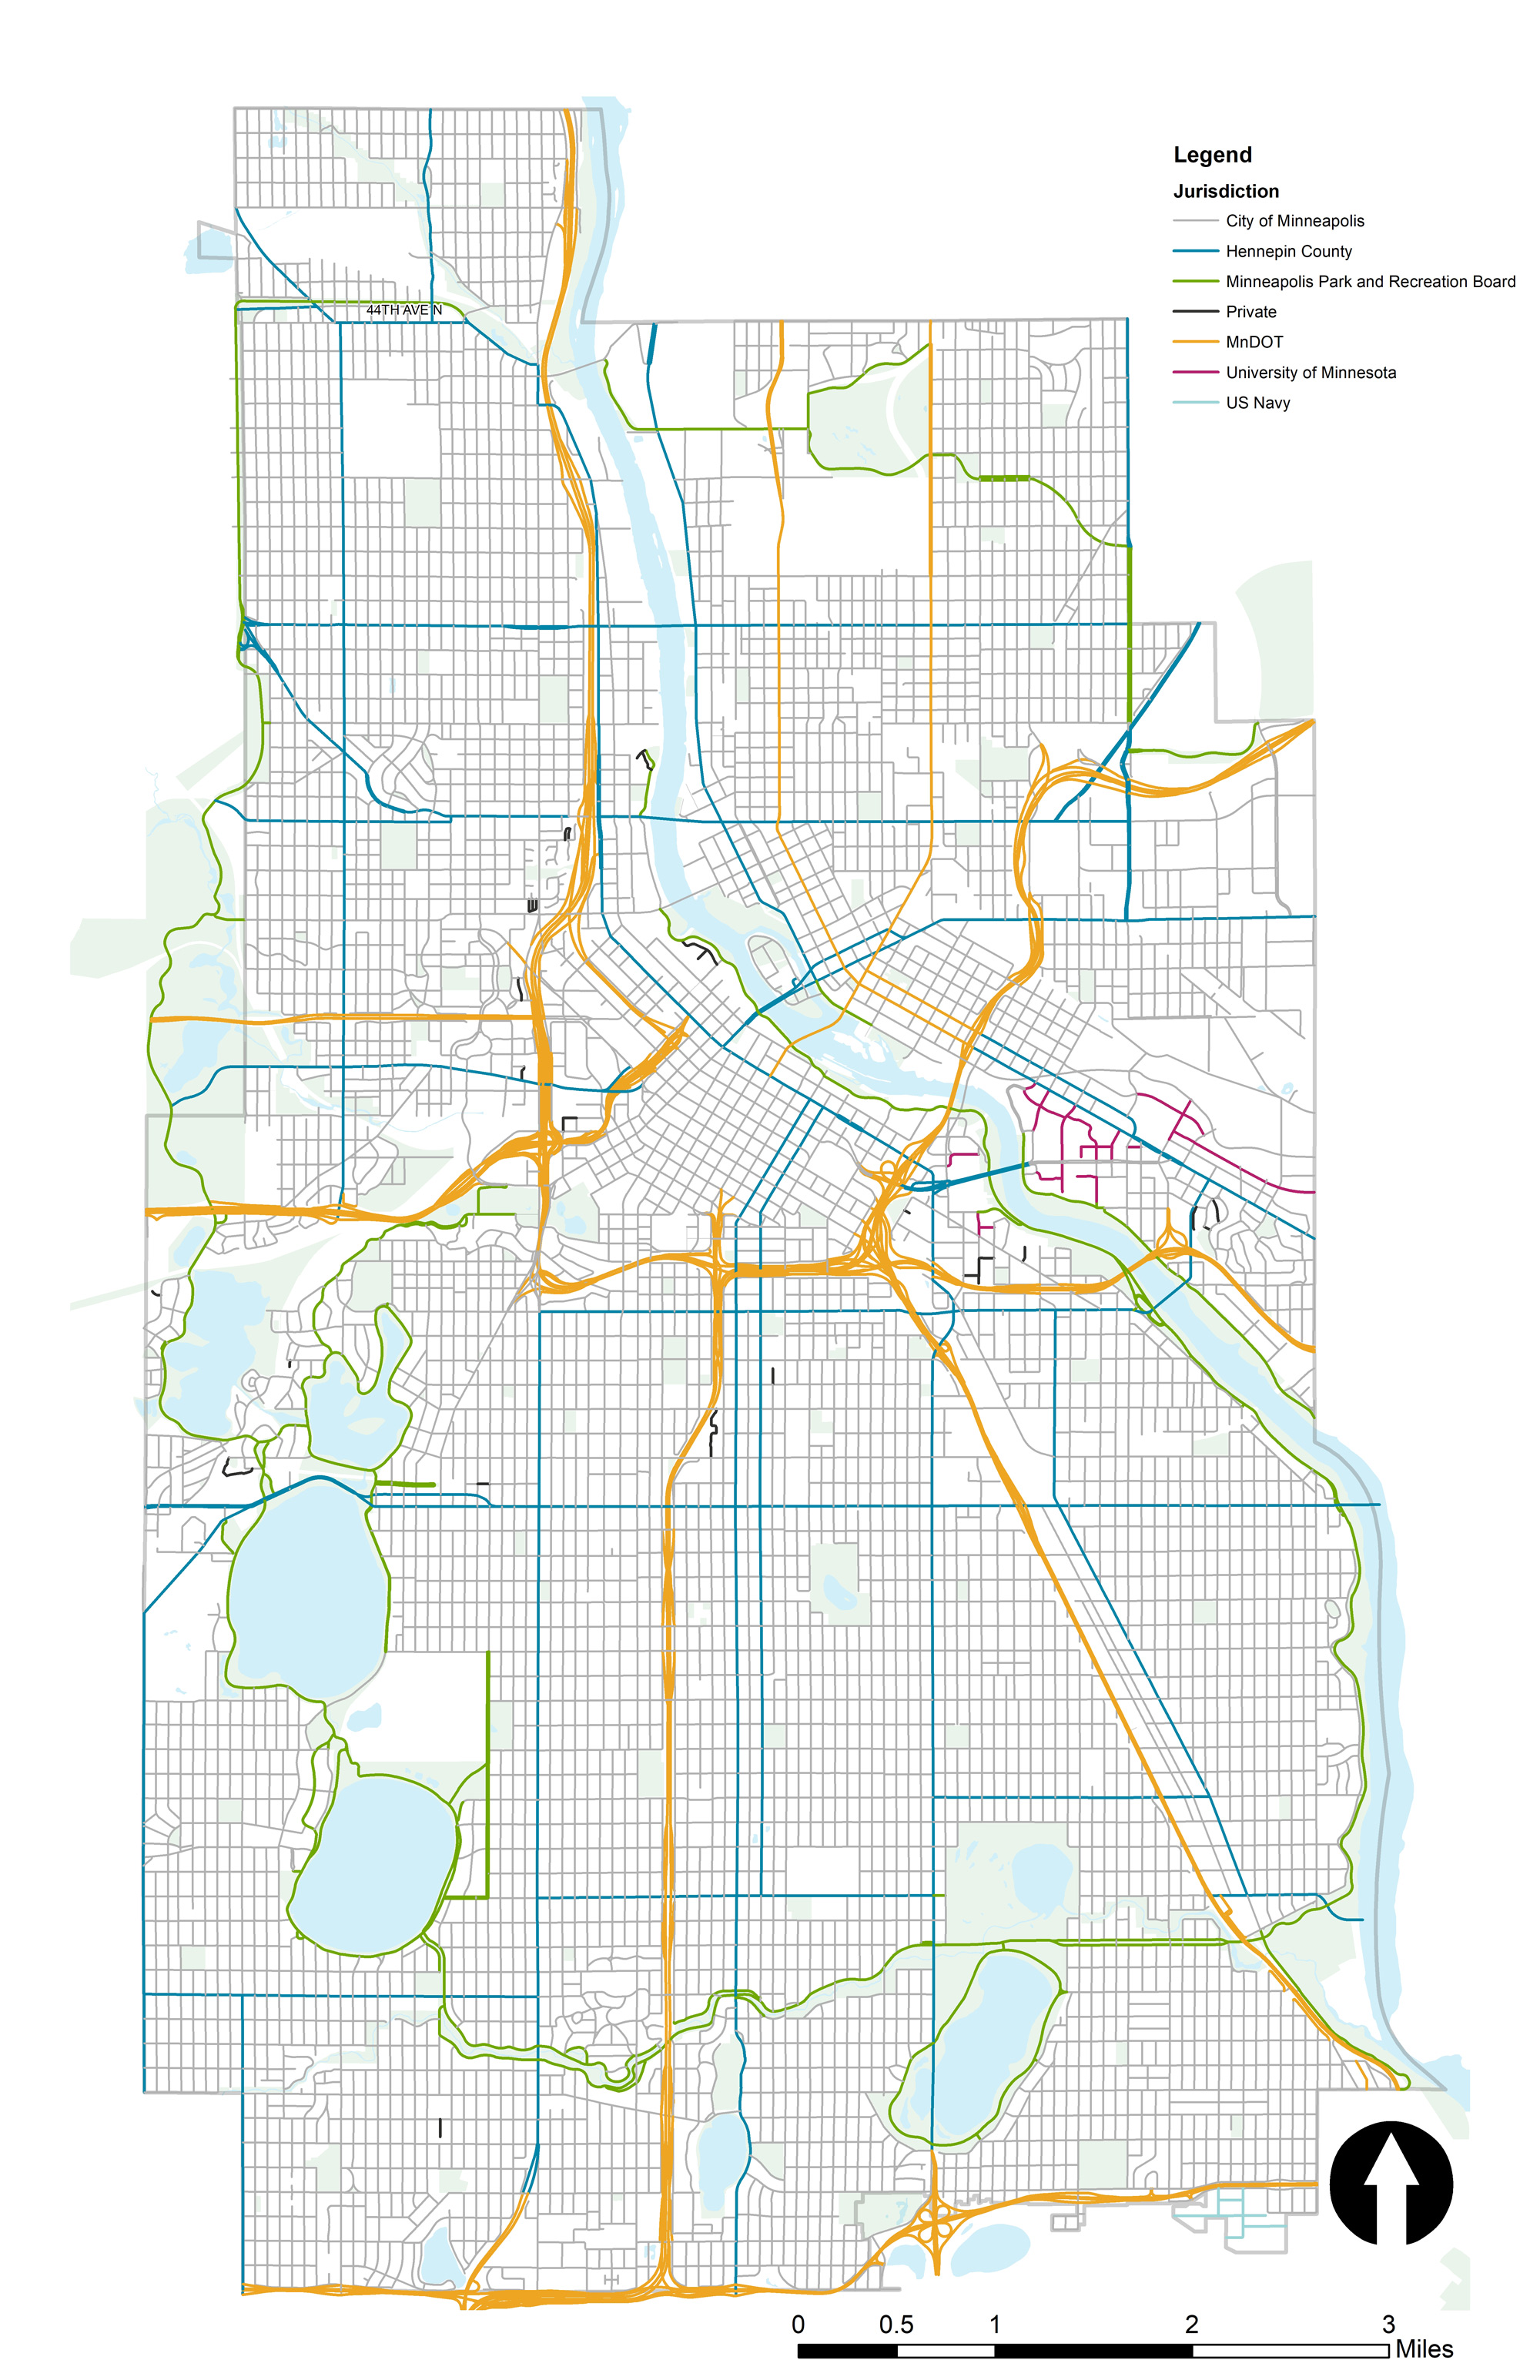 Map showing ownership of roadways in Minneapolis by City of Minneapolis, Hennepin County, Minneapolis Park and Rec Baord, Private, MnDOT, University of Minnesota, and the US Navy